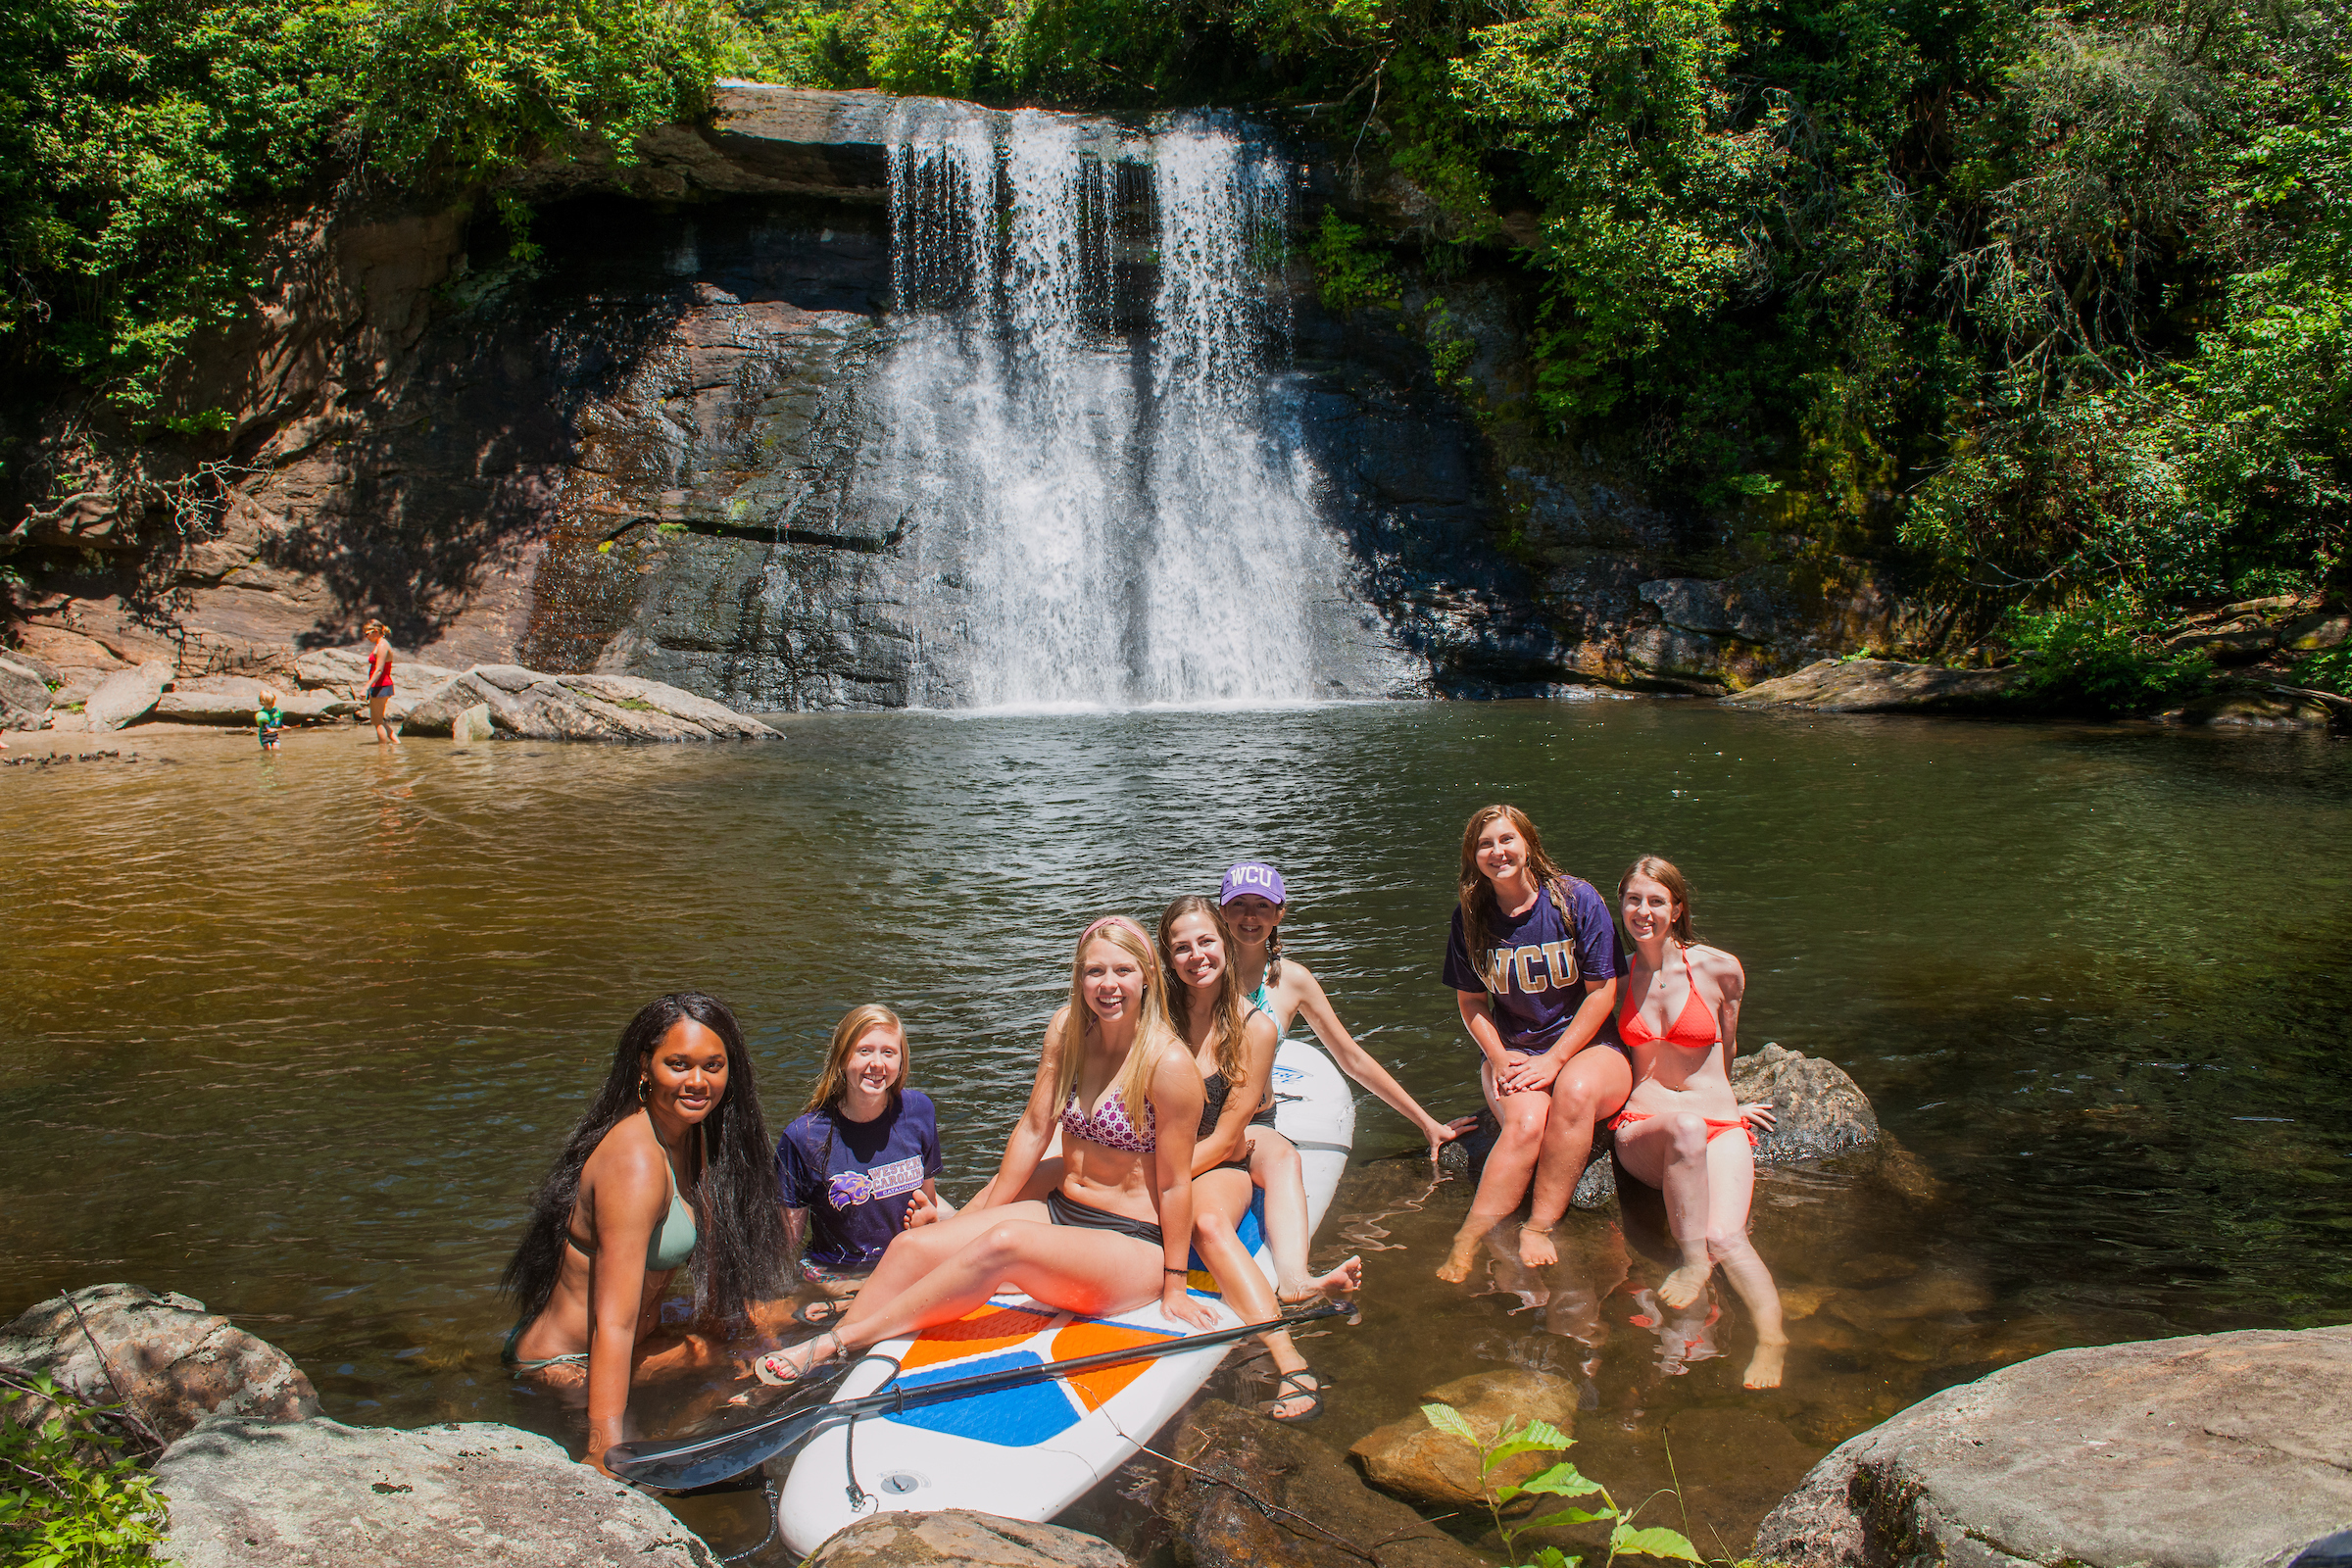 First Ascent Wilderness Students at a local swimming hole